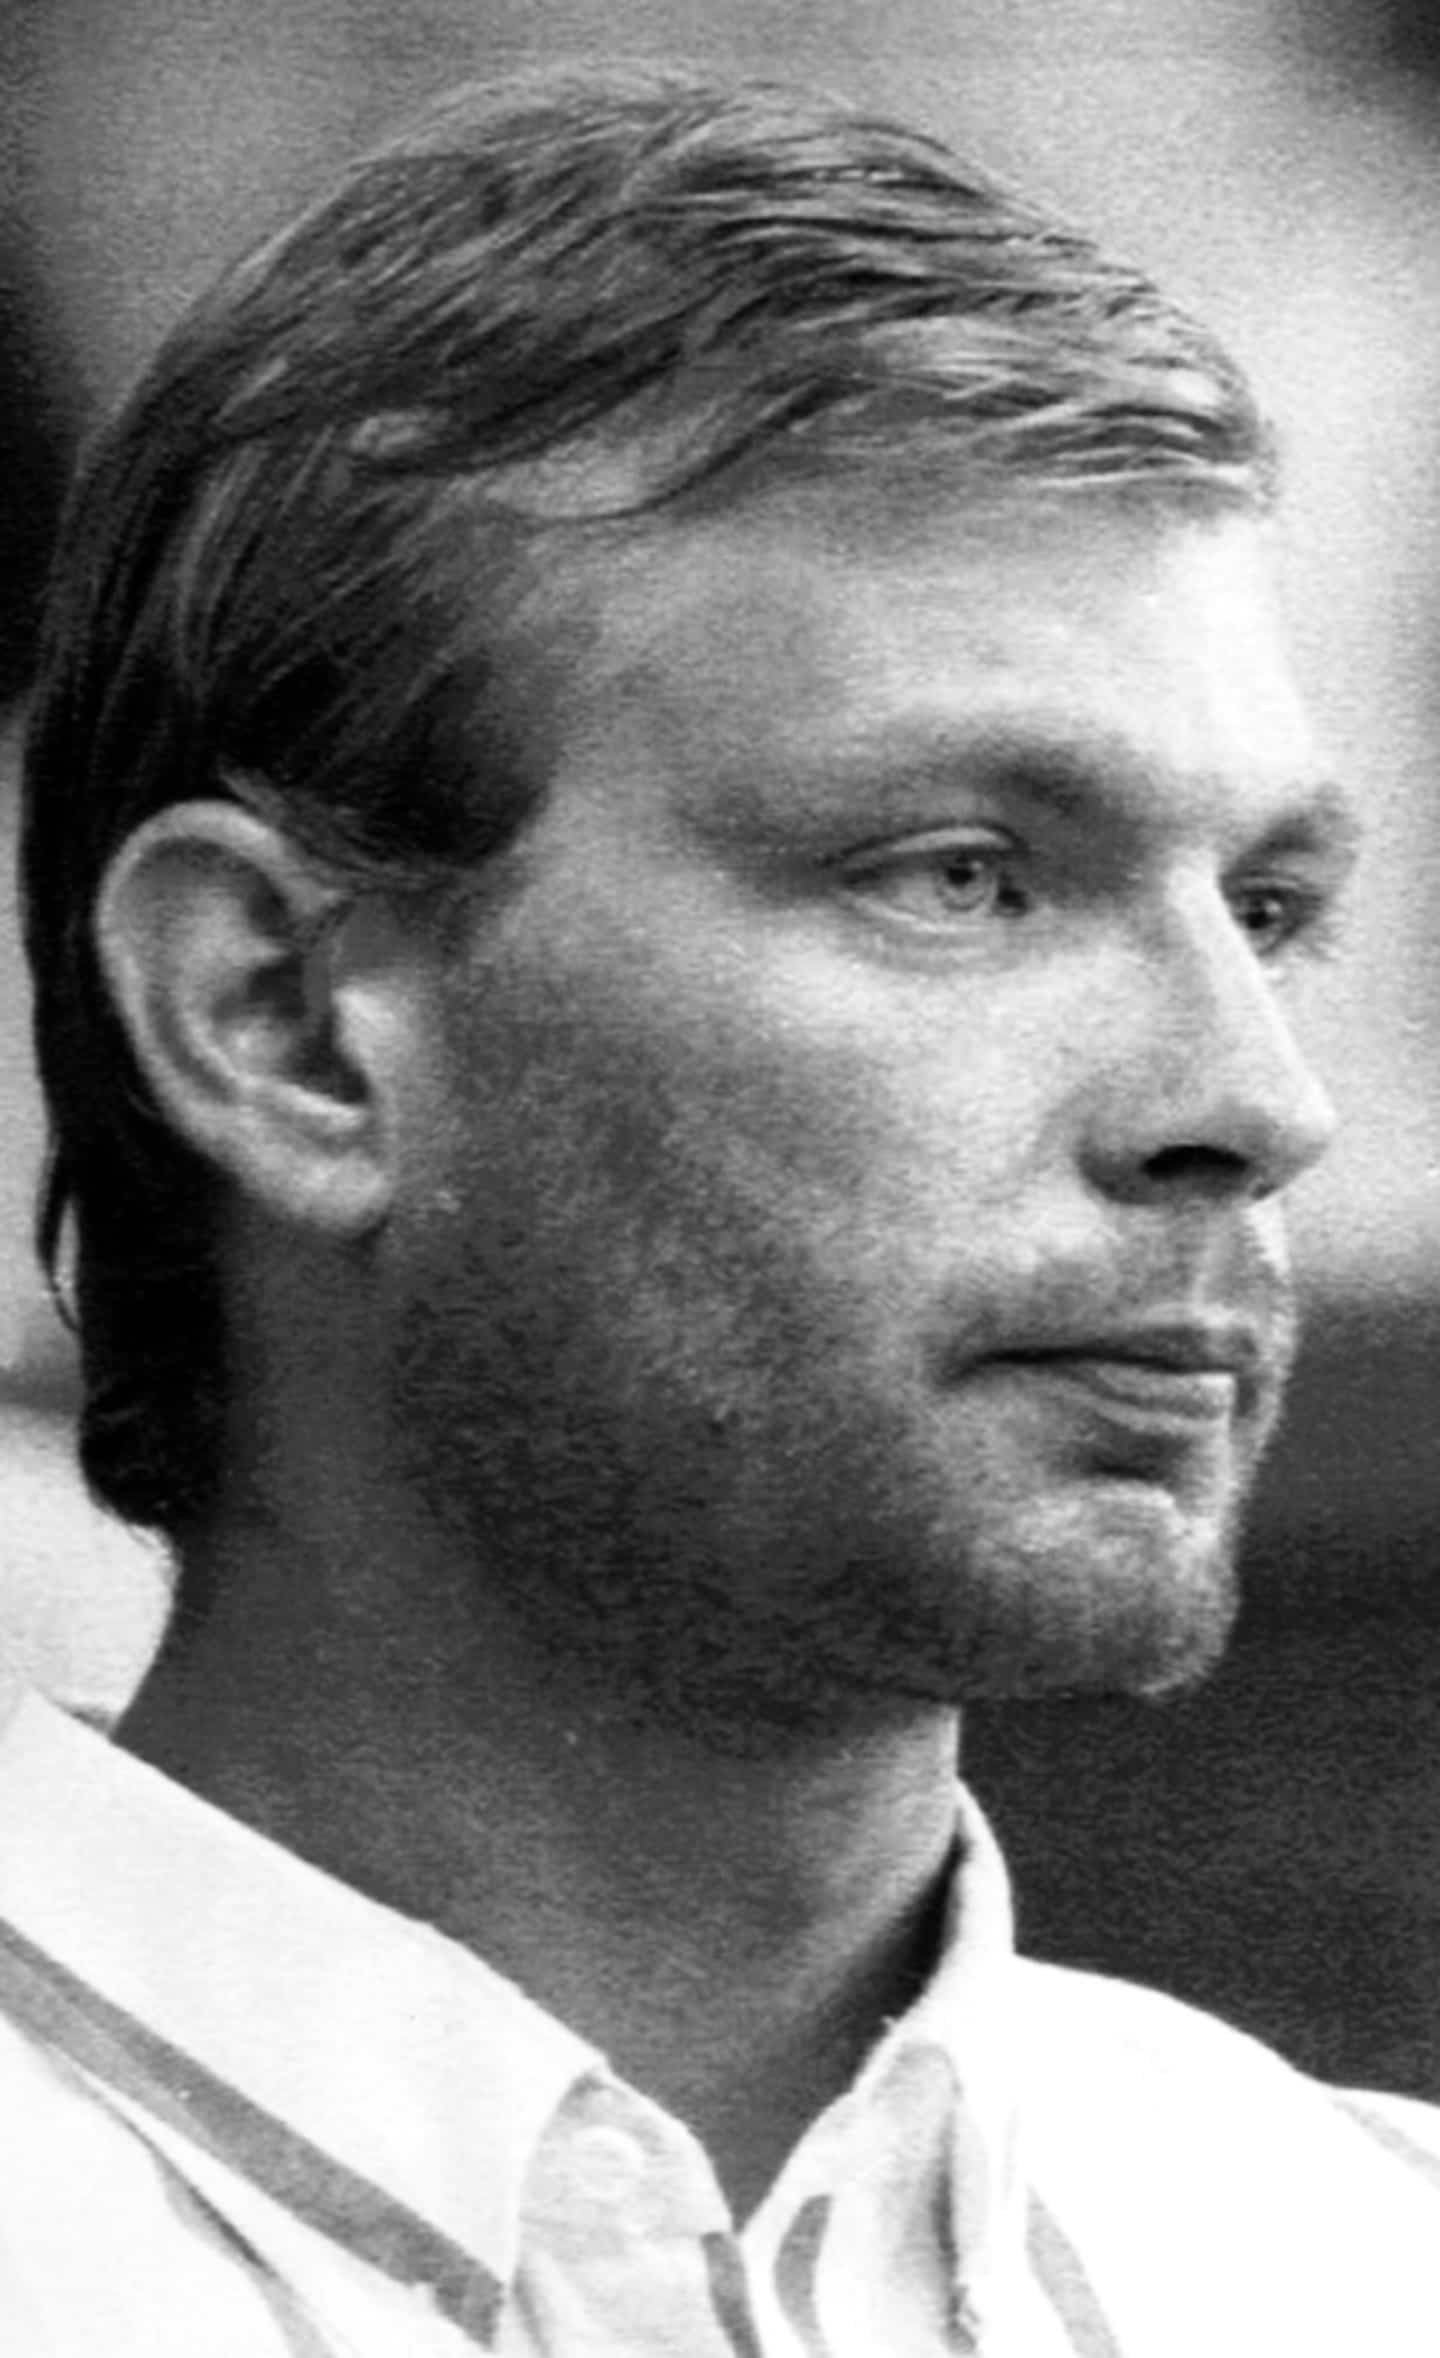 Milwaukee: Customers Dressed As Jeffrey Dahmer Won't Be Able To Enter These Gay Bars